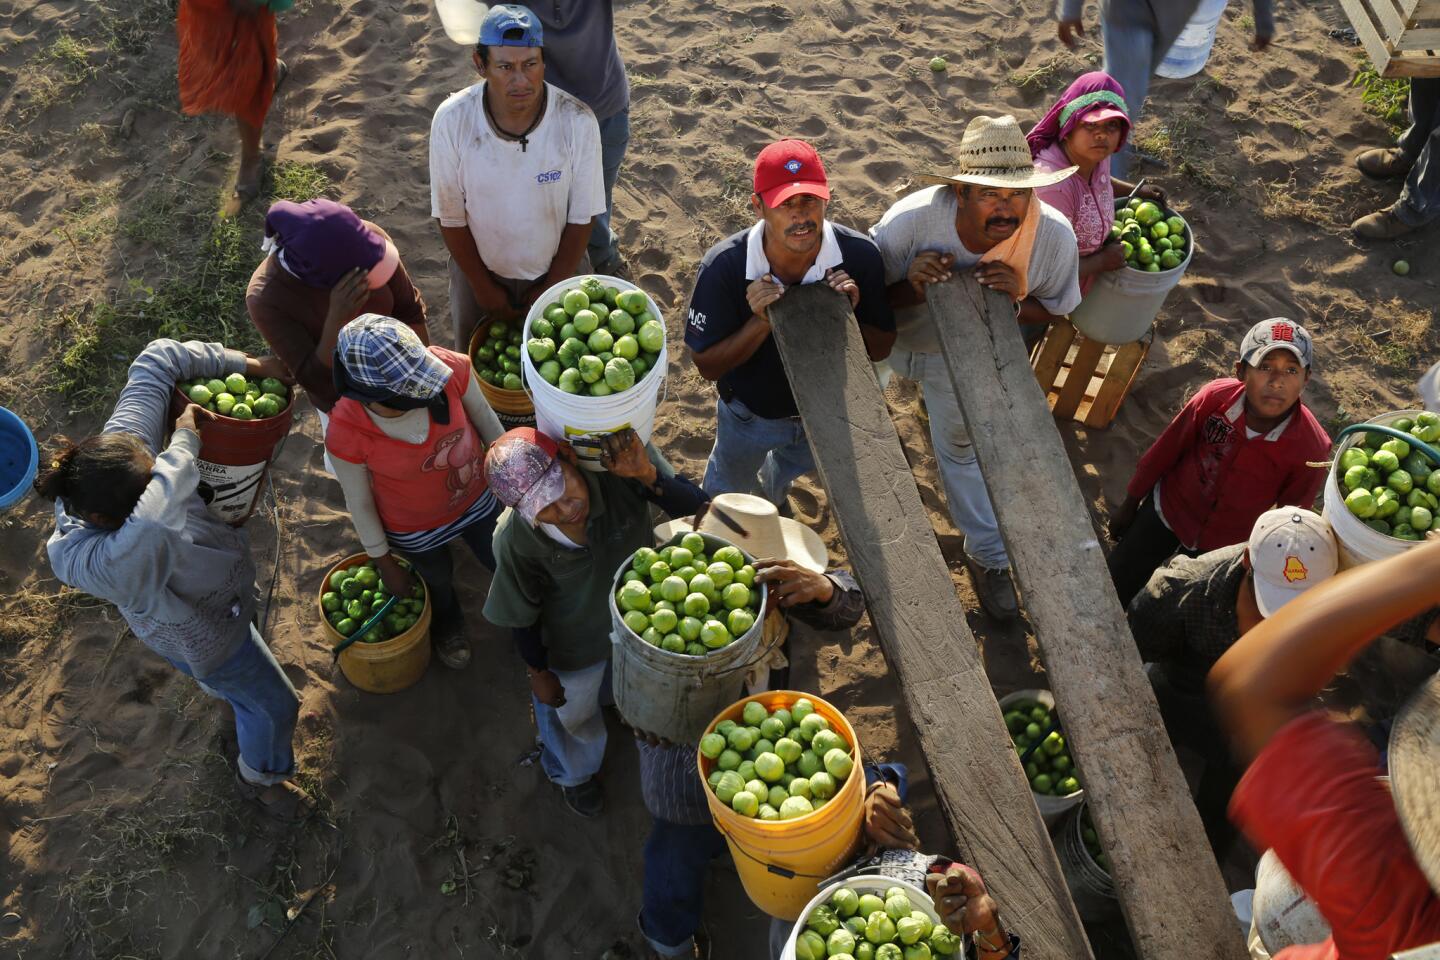 Workers wait to dump tomatillos into a cargo truck near the coastal pueblo of Teacapan, Sinaloa. Large, bright green tomatillos like these are favored by exporters.